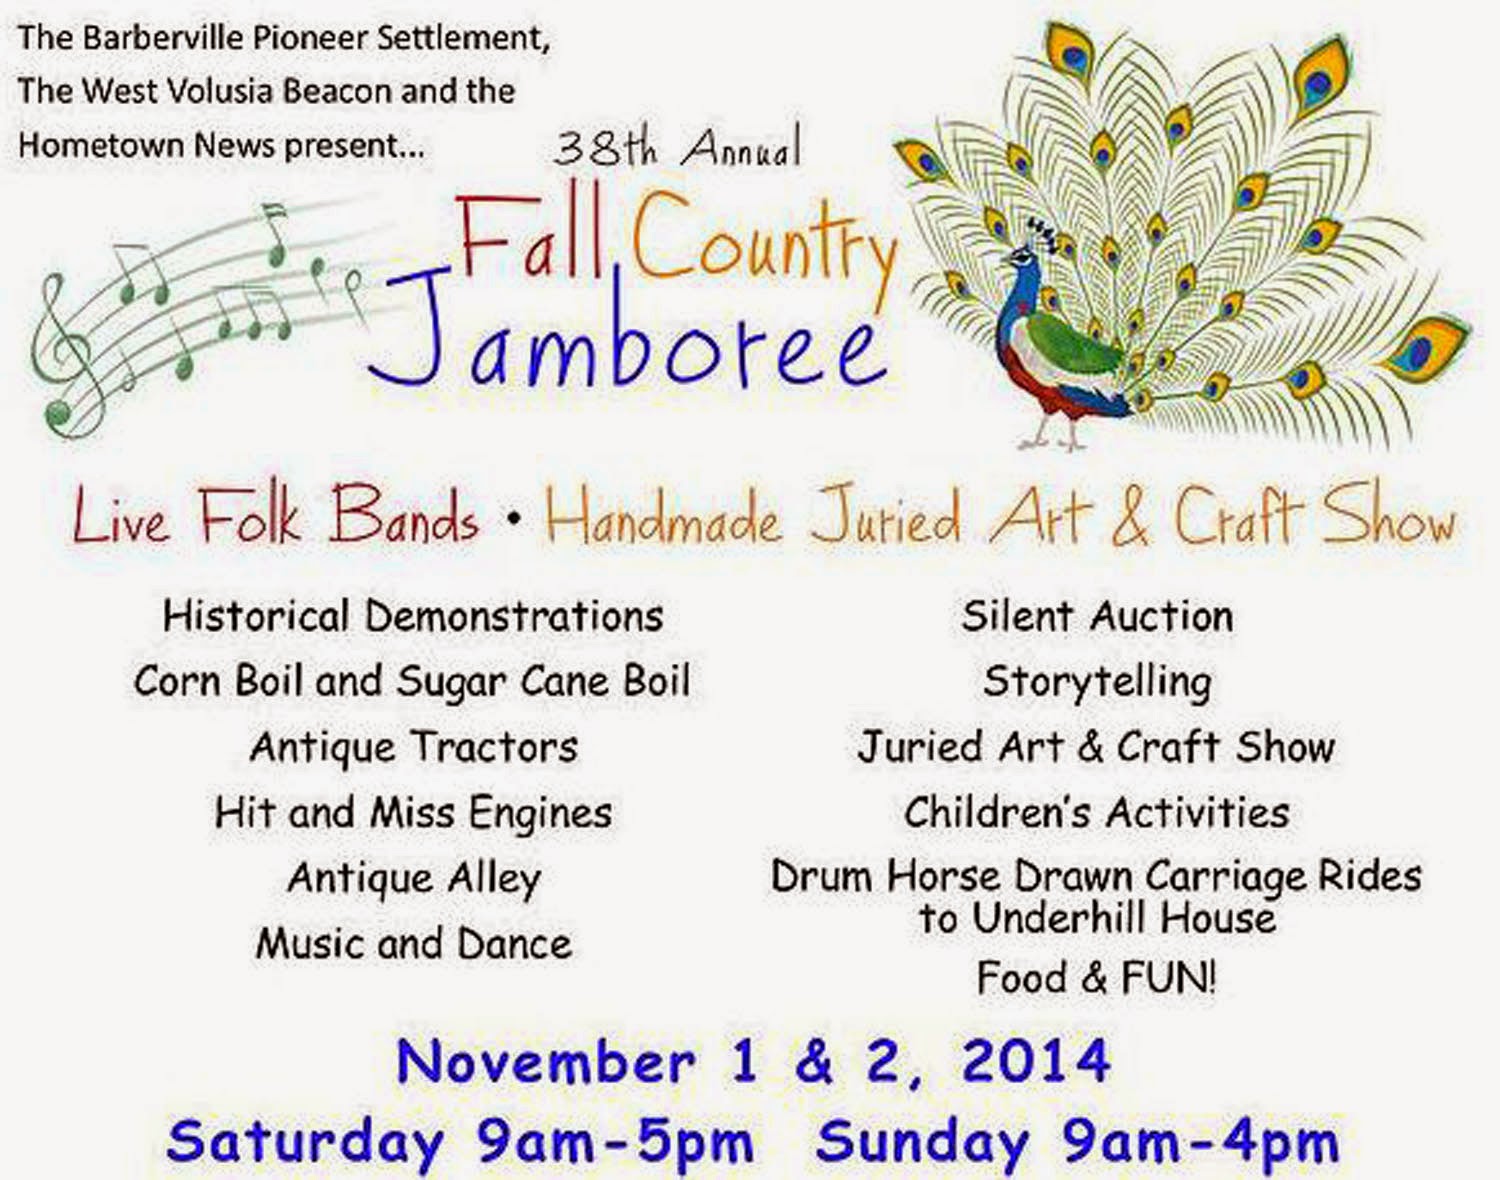 http://www.pioneersettlement.org/#!38th-Fall-Country-Jamboree/c1zty/C53D0797-73E7-4E3C-8338-2DF6A89A2F7A